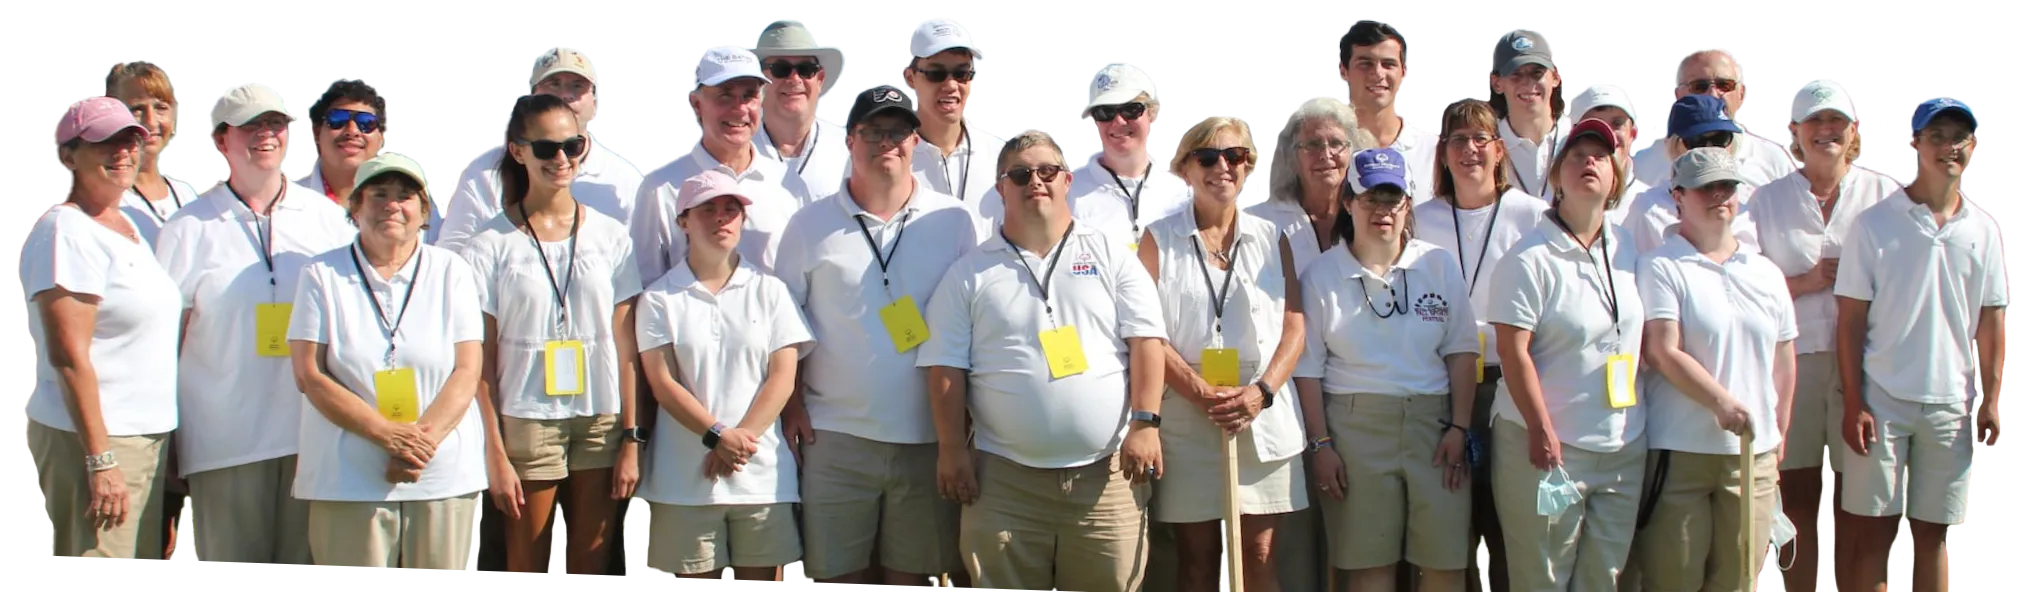 Individuals standing outside wearing white golf shirts smiling.